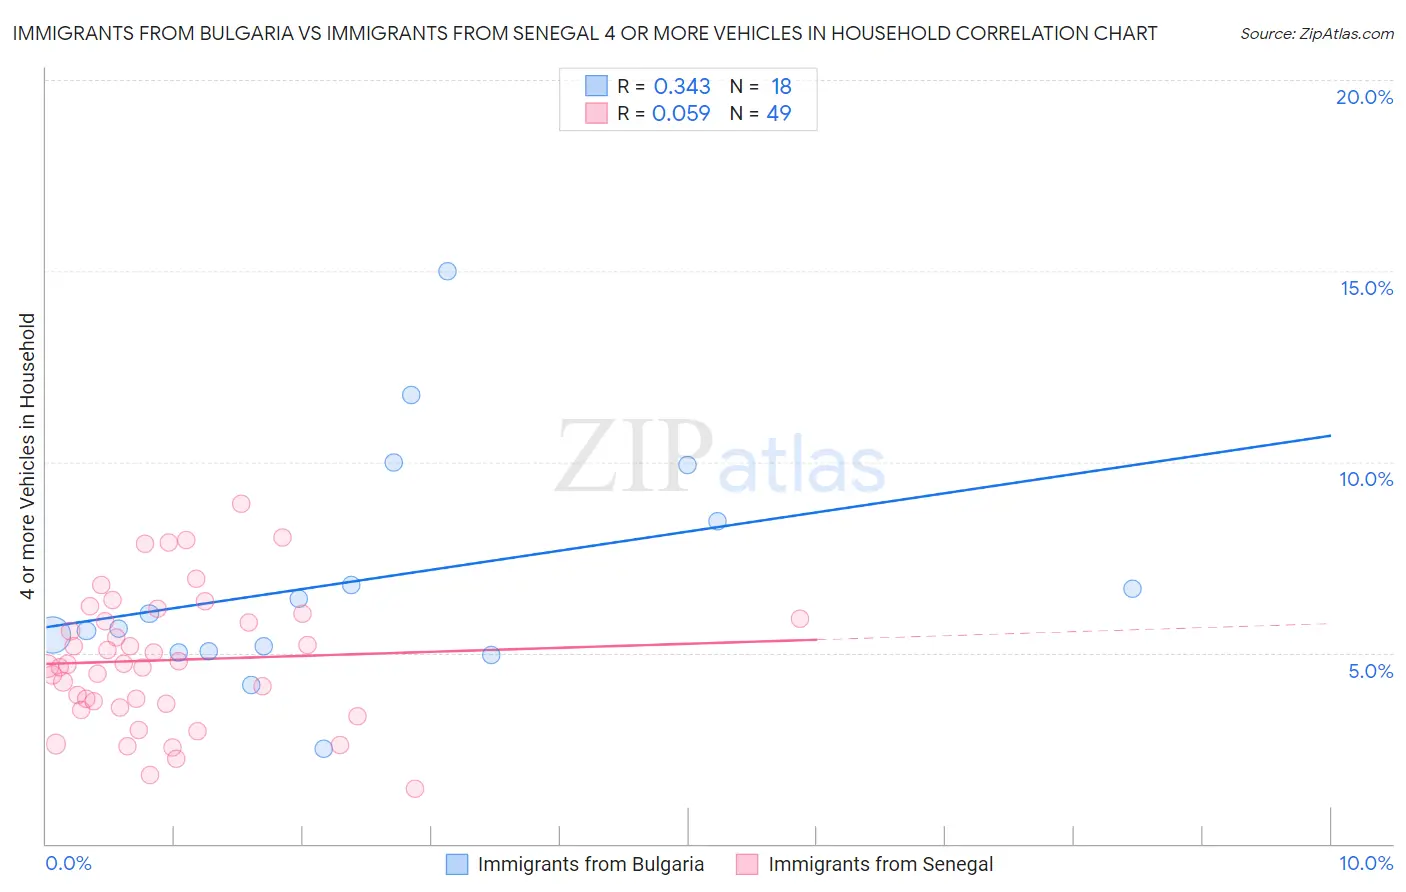 Immigrants from Bulgaria vs Immigrants from Senegal 4 or more Vehicles in Household